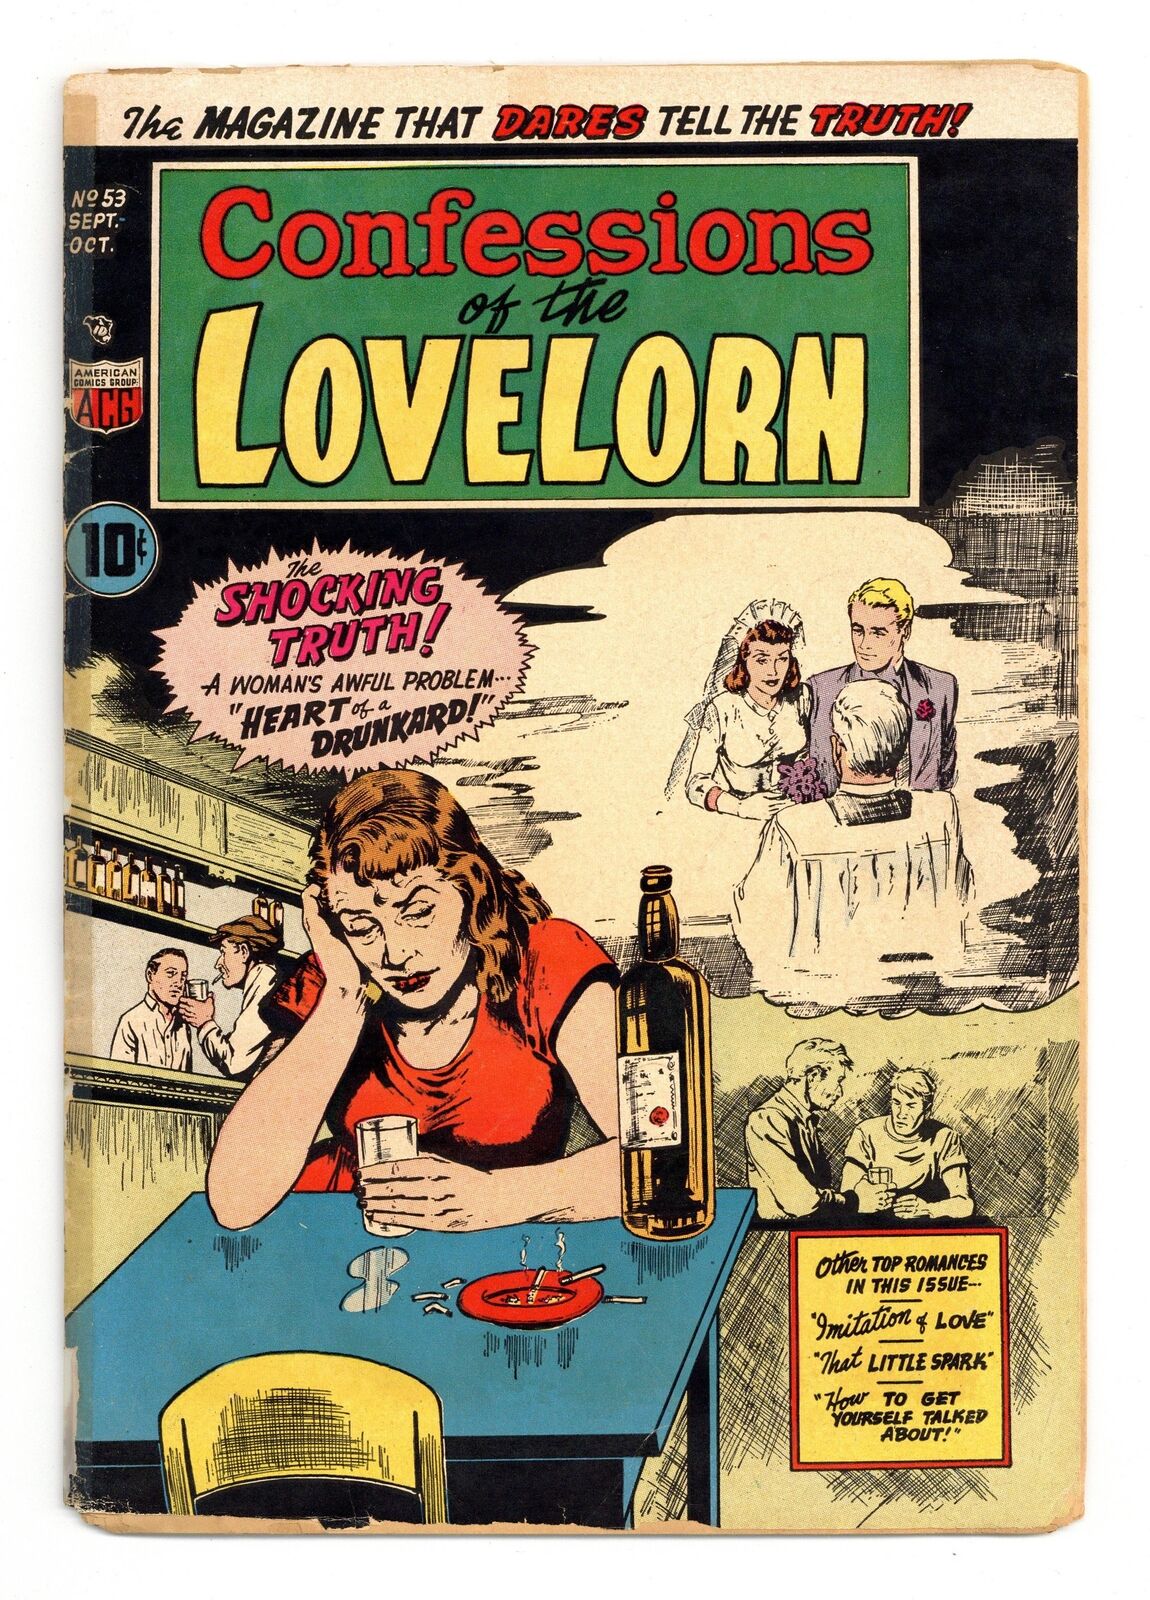 Confessions of the Lovelorn #53 PR 0.5 1954